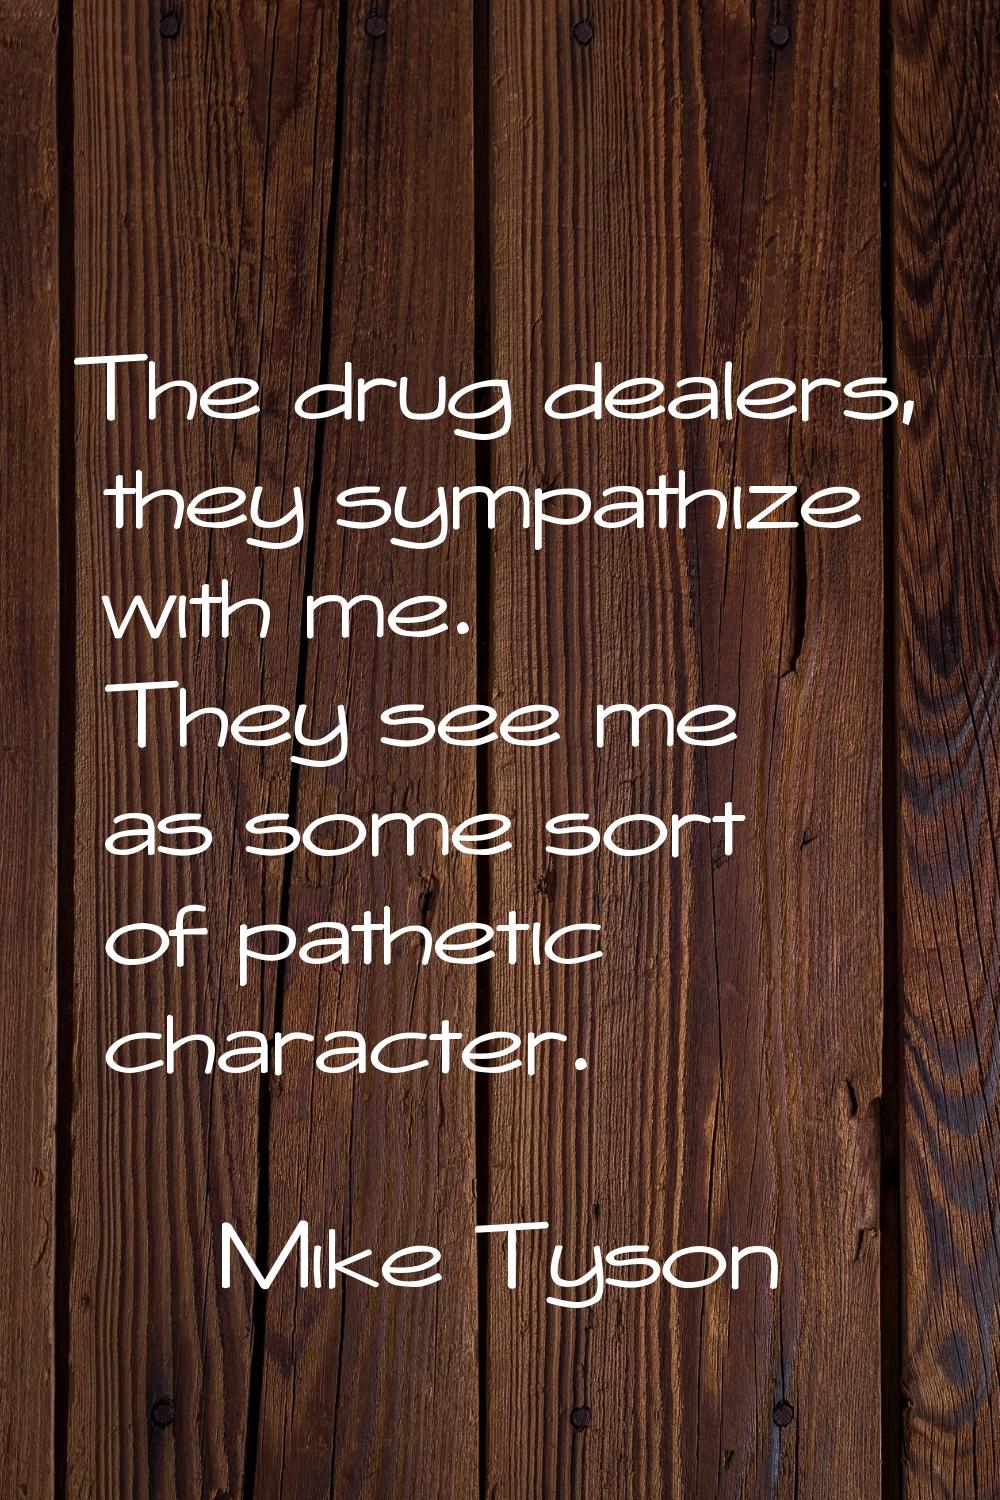 The drug dealers, they sympathize with me. They see me as some sort of pathetic character.